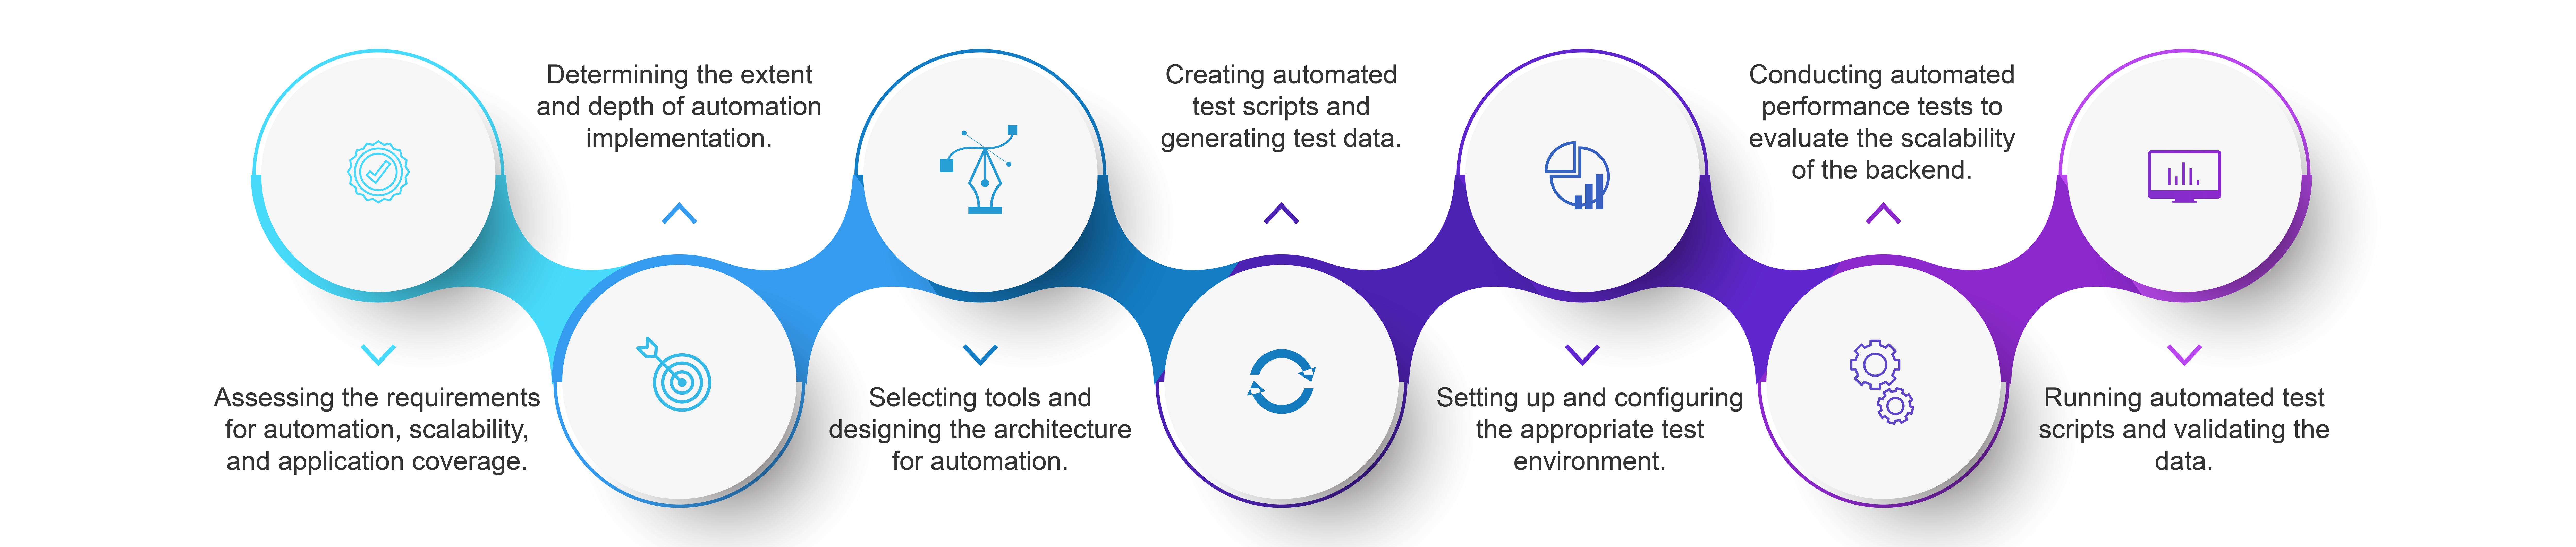 Test Automation Approach